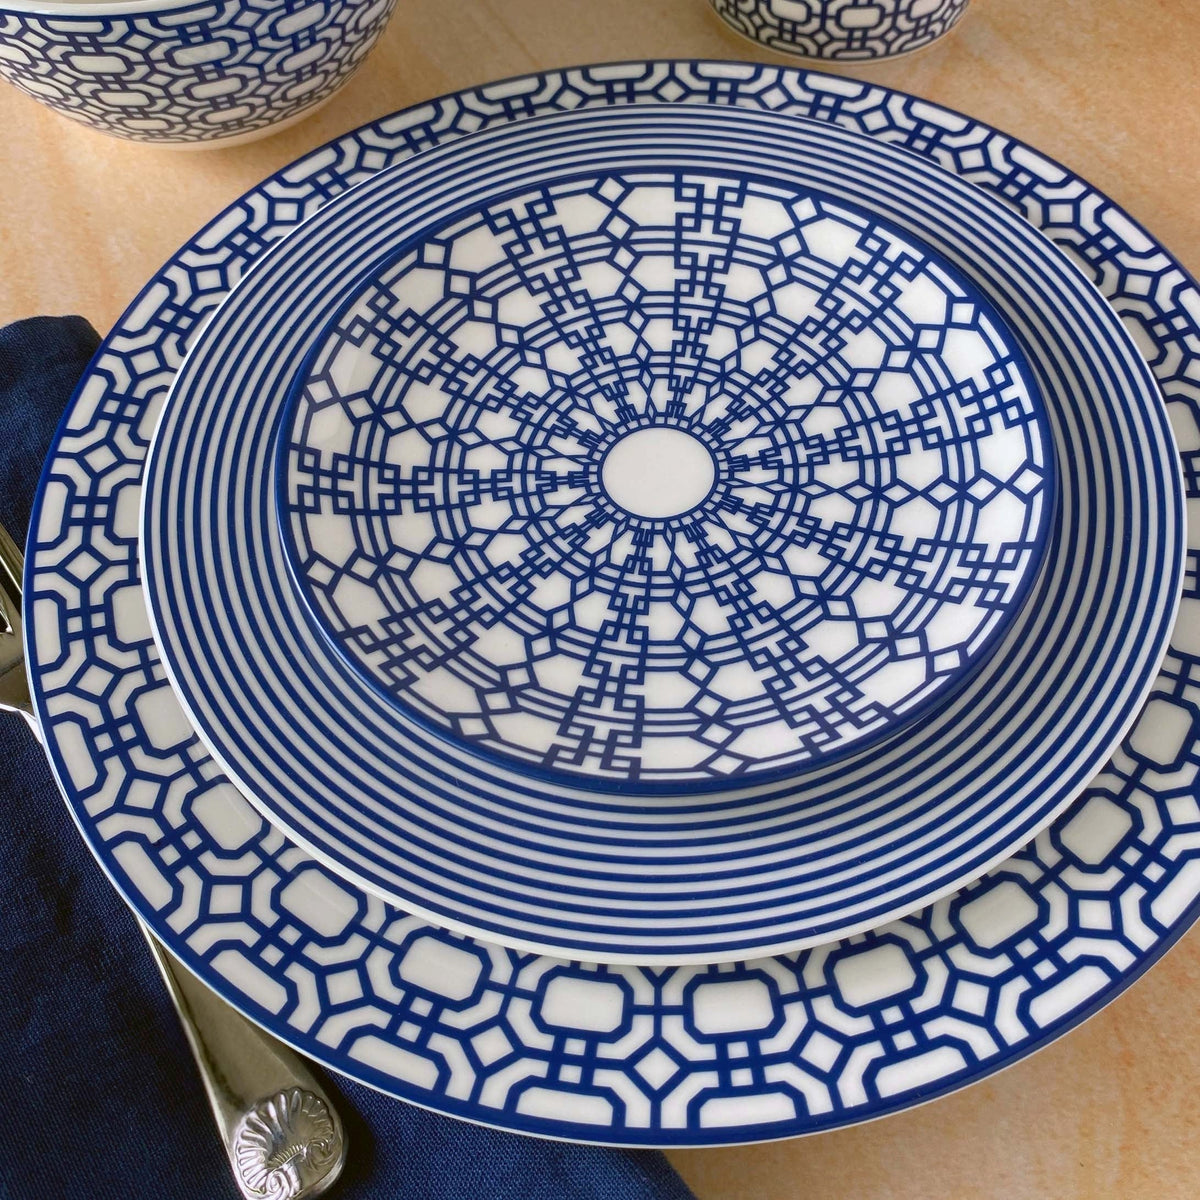 A Newport Garden Gate Rimmed Salad Plate from Caskata Artisanal Home with intricate blue geometric patterns on a light surface, reminiscent of the Newport Garden Gate design. A dark blue napkin and a silver spoon are partially visible in the bottom left corner, enhancing this premium porcelain display.